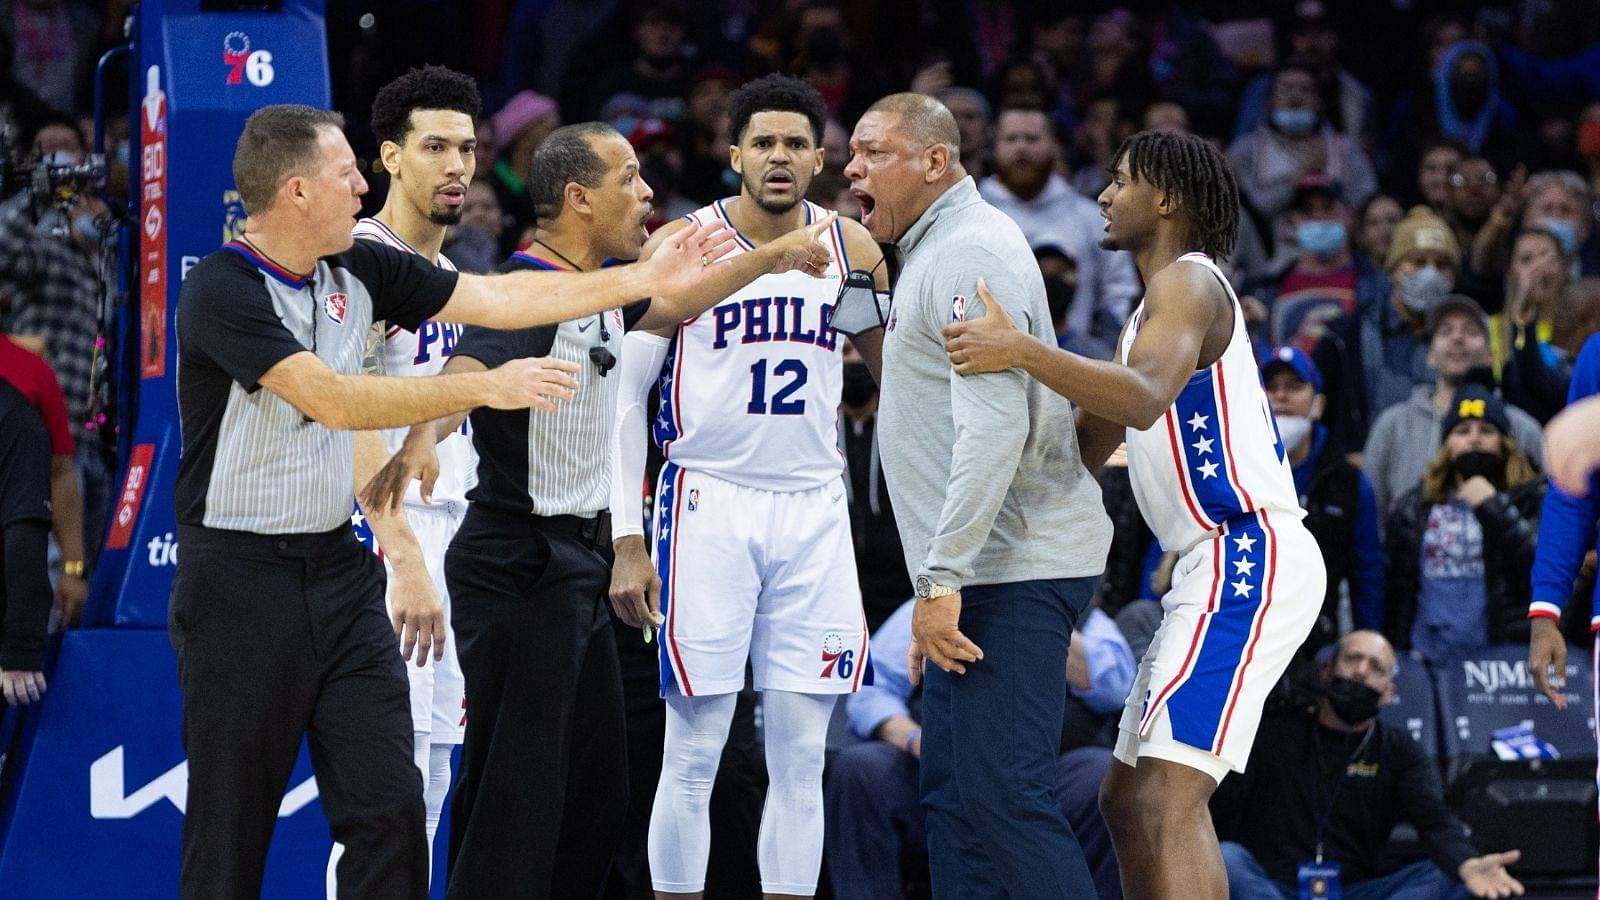 "Only Doc Rivers could start an overtime down by a point": NBA Twitter cannot stop itself from roasting Sixers' head coach while being in awe of Tyrese Maxey's 33-point night against the Grizzlies